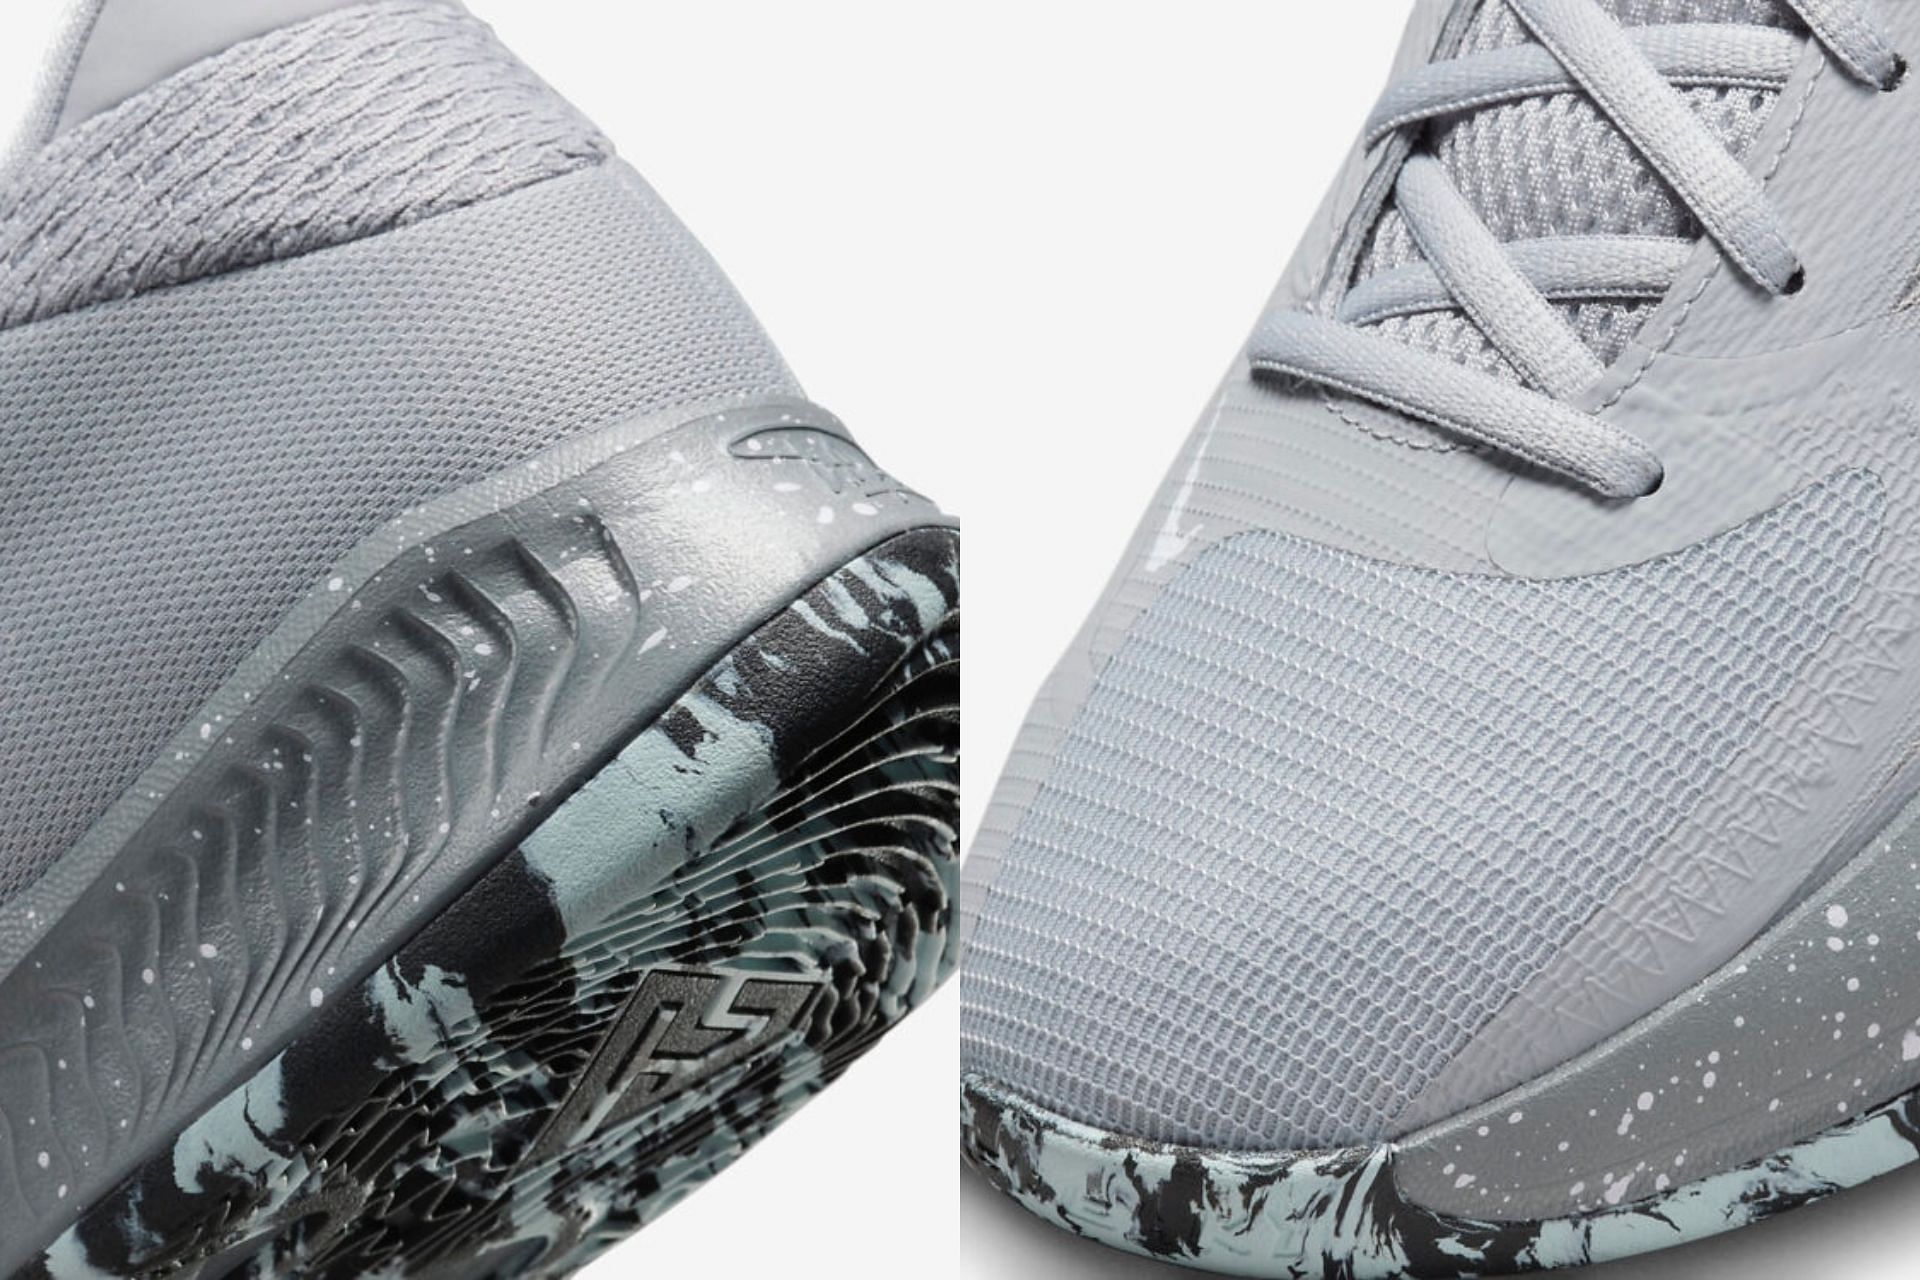 Take a closer look at the heel and toe top of the shoe (Image via Nike)